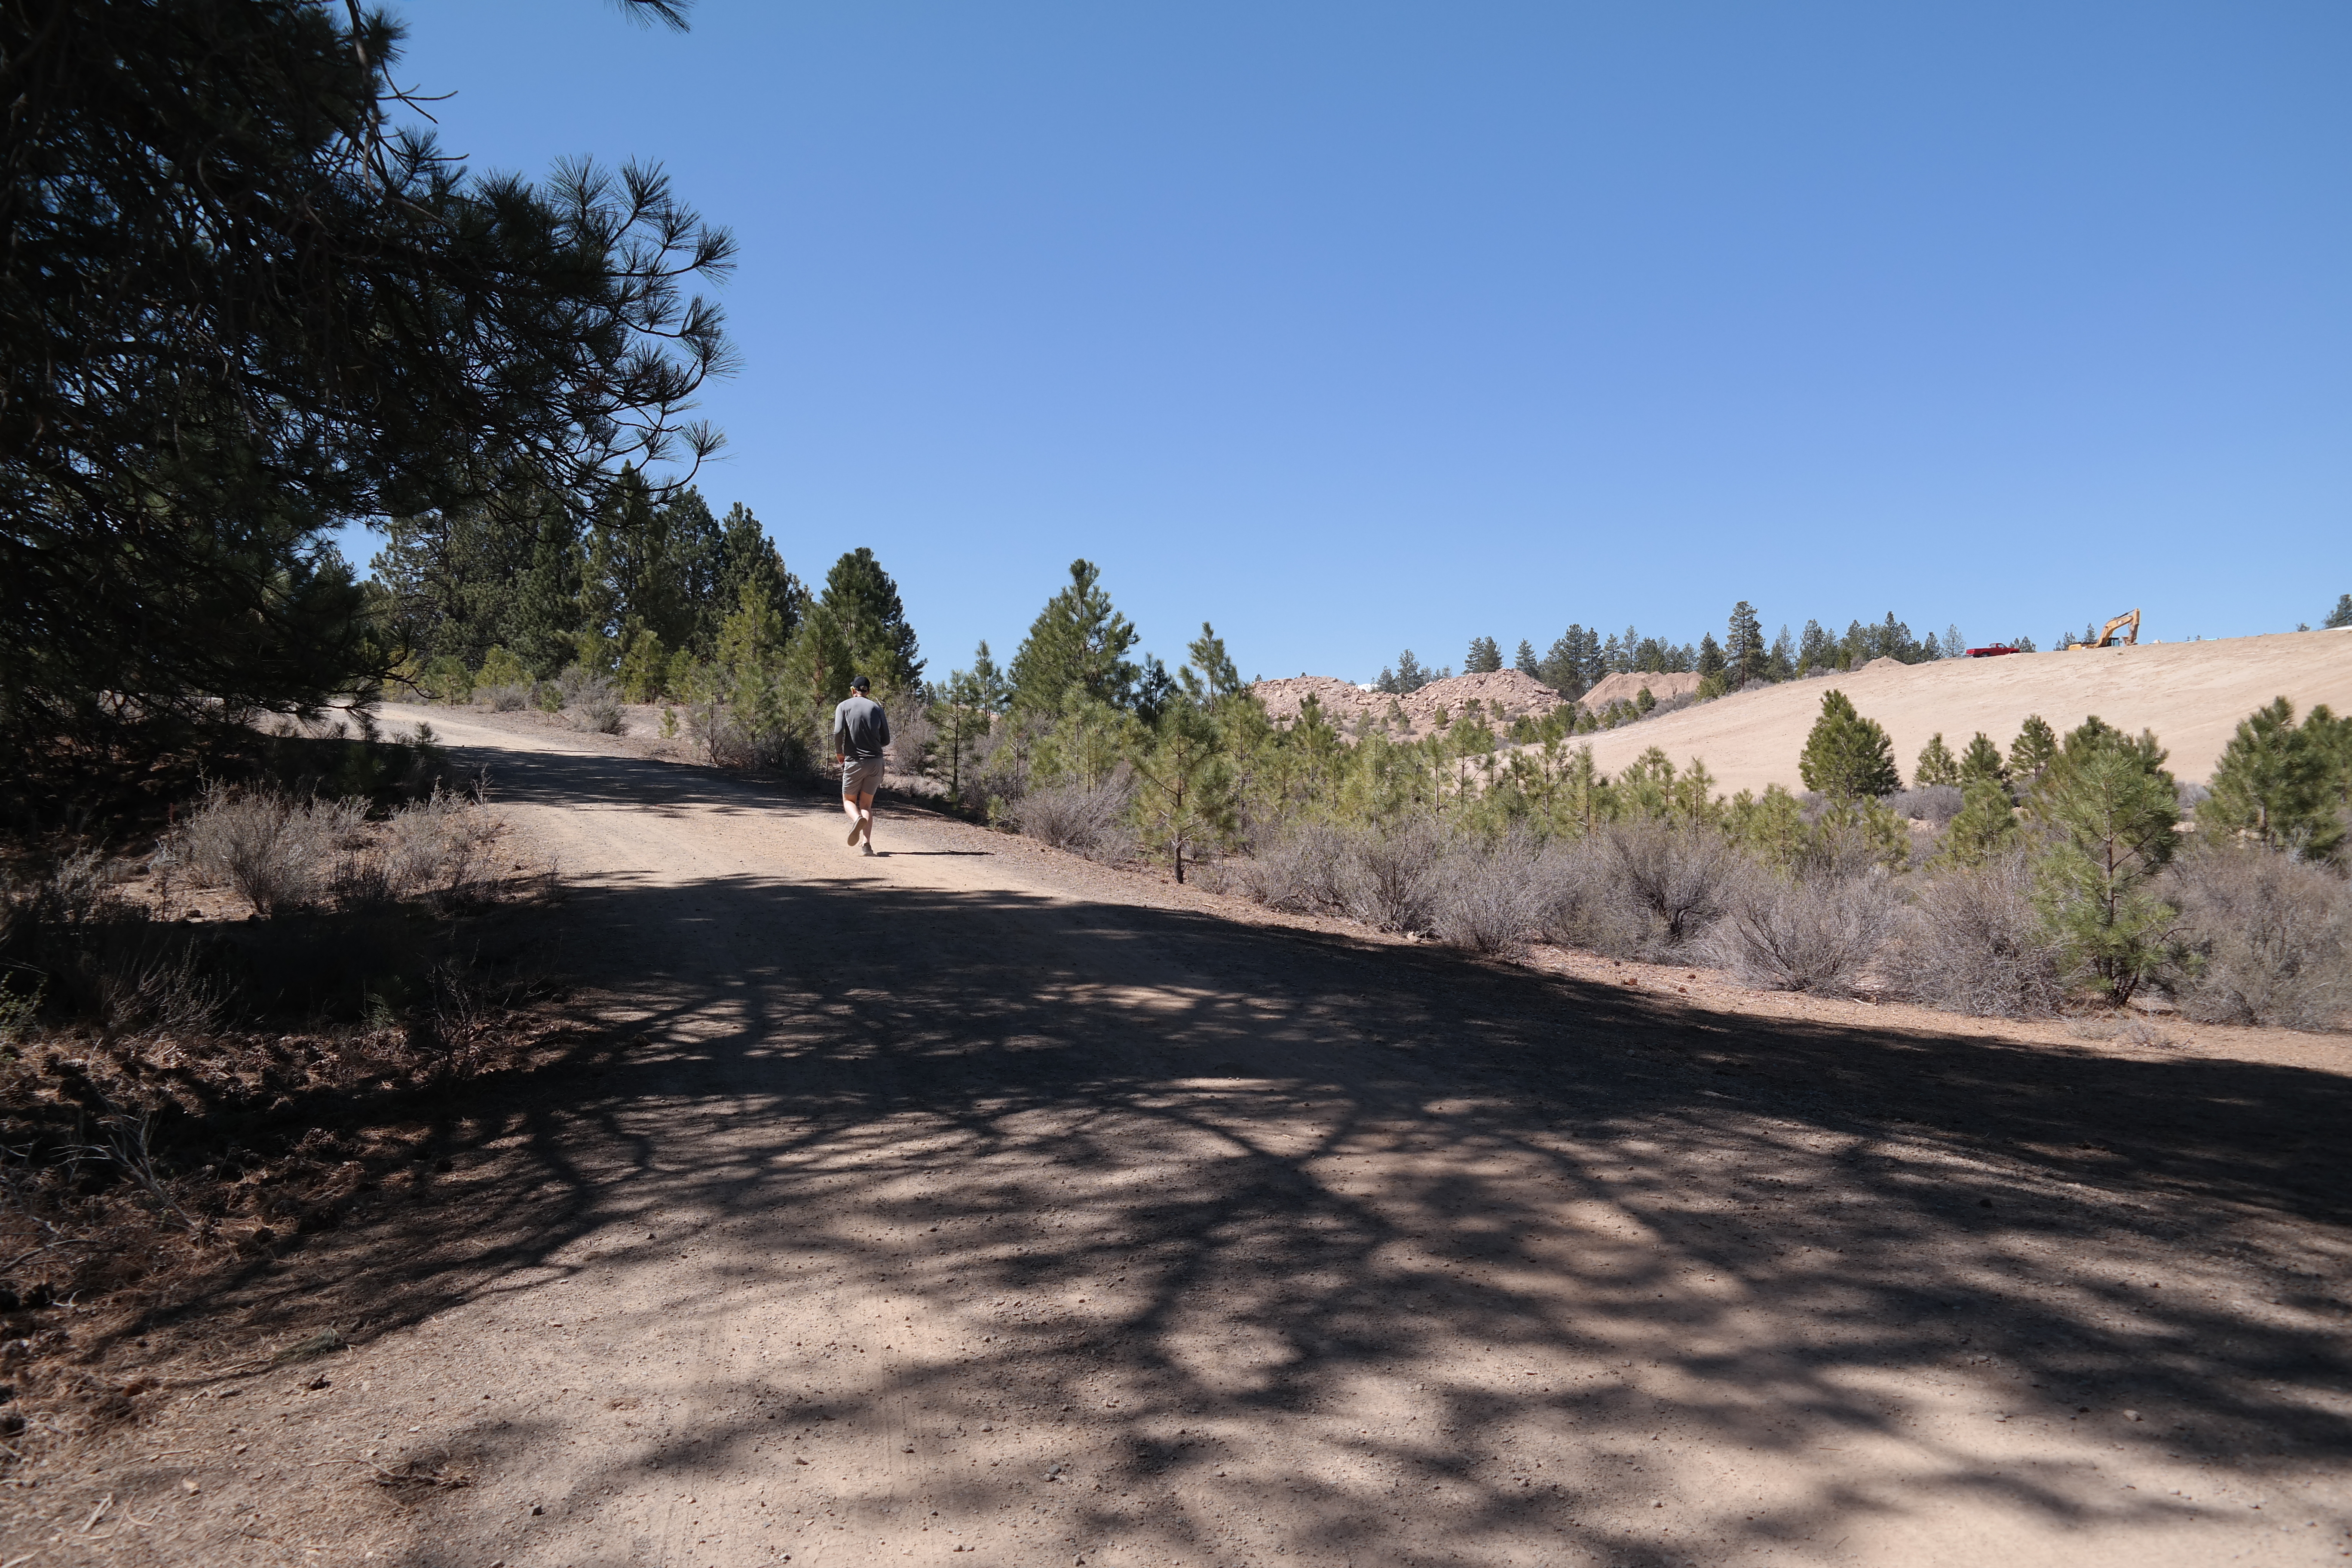 Image of the Discovery West outback trail and open space